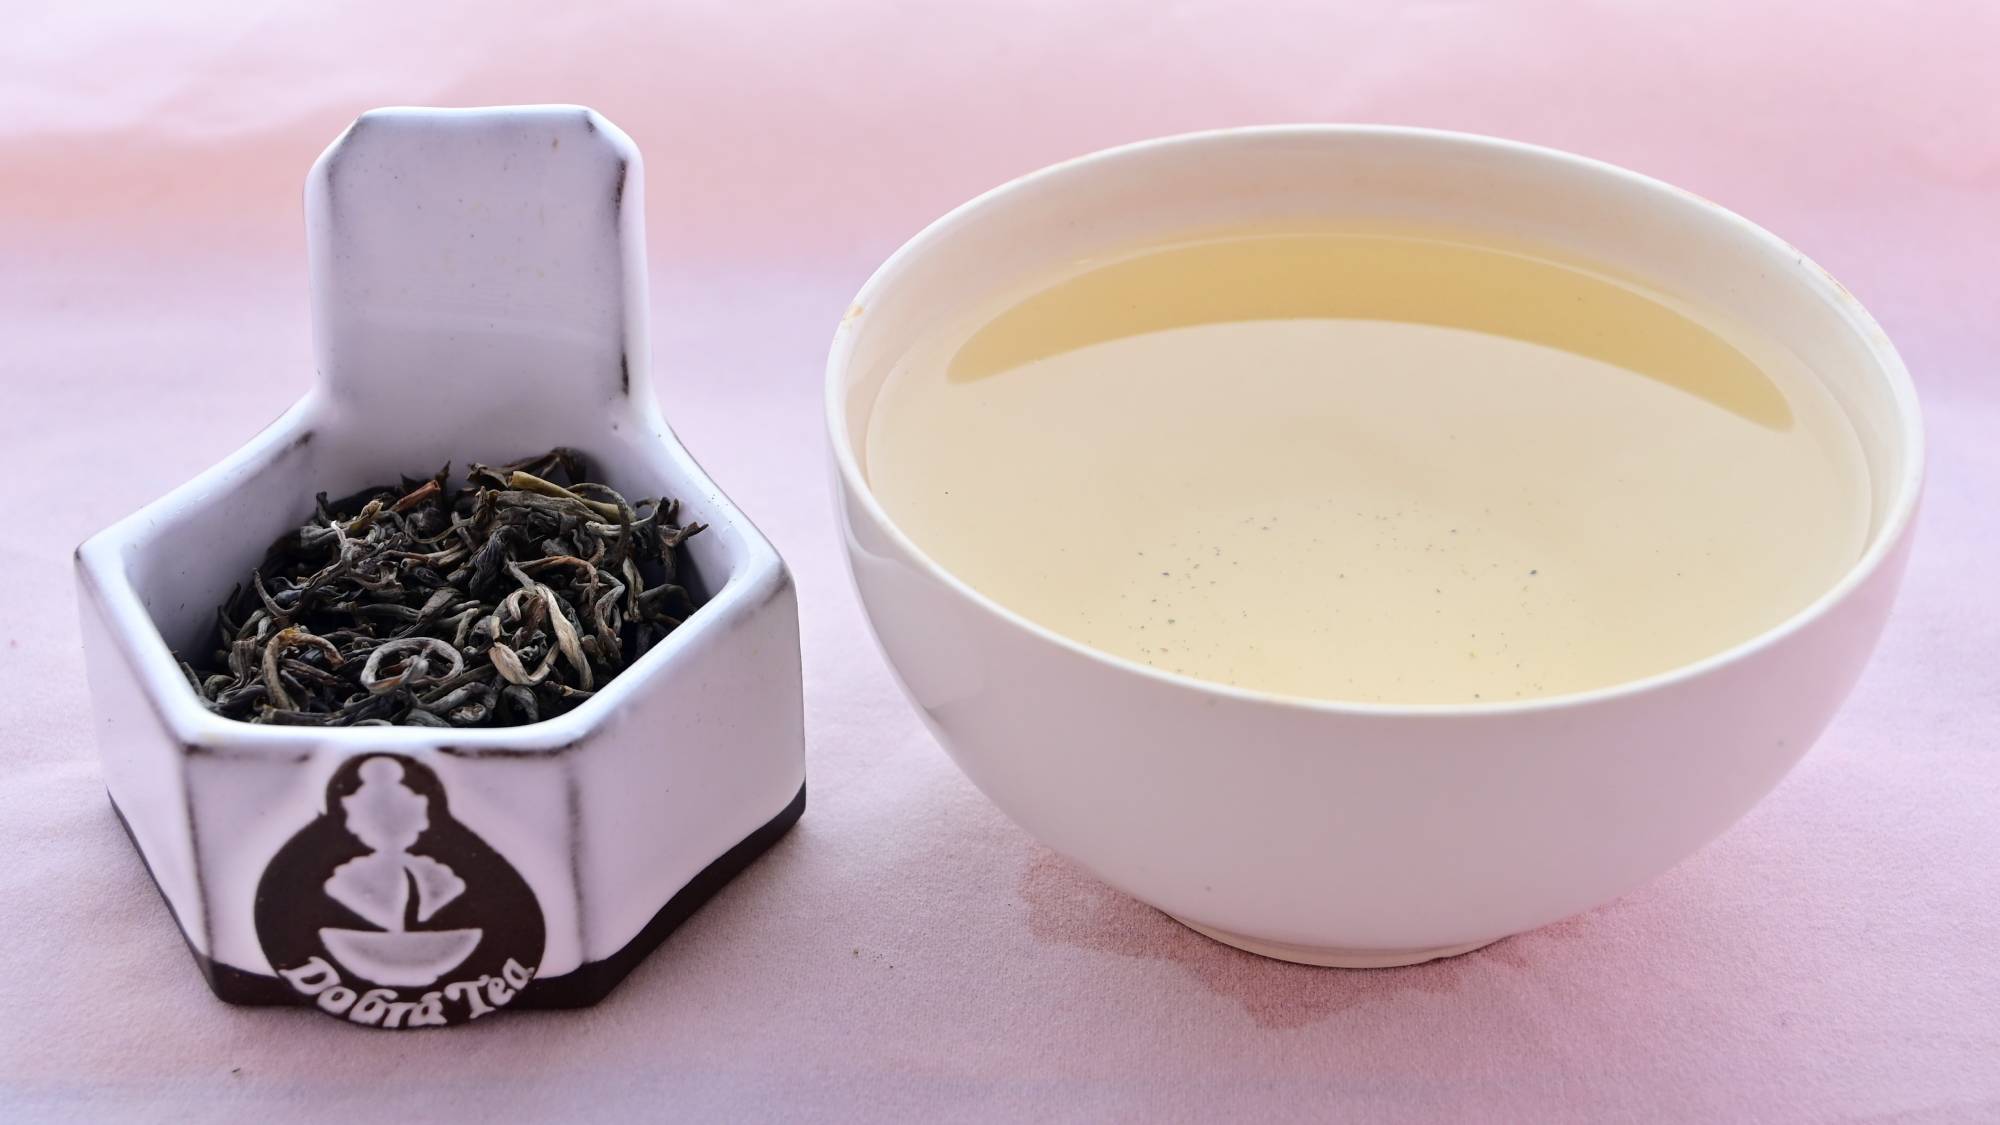 A side-by-side comparison of Ancient Arbor (Ha Giang Che Xanh) leaves and steeped tea. On the left, the leaves are curled around nearly into circles. They are dark green with the occasional light green tossed in. On the right, the steeped tea is a pale yellow.